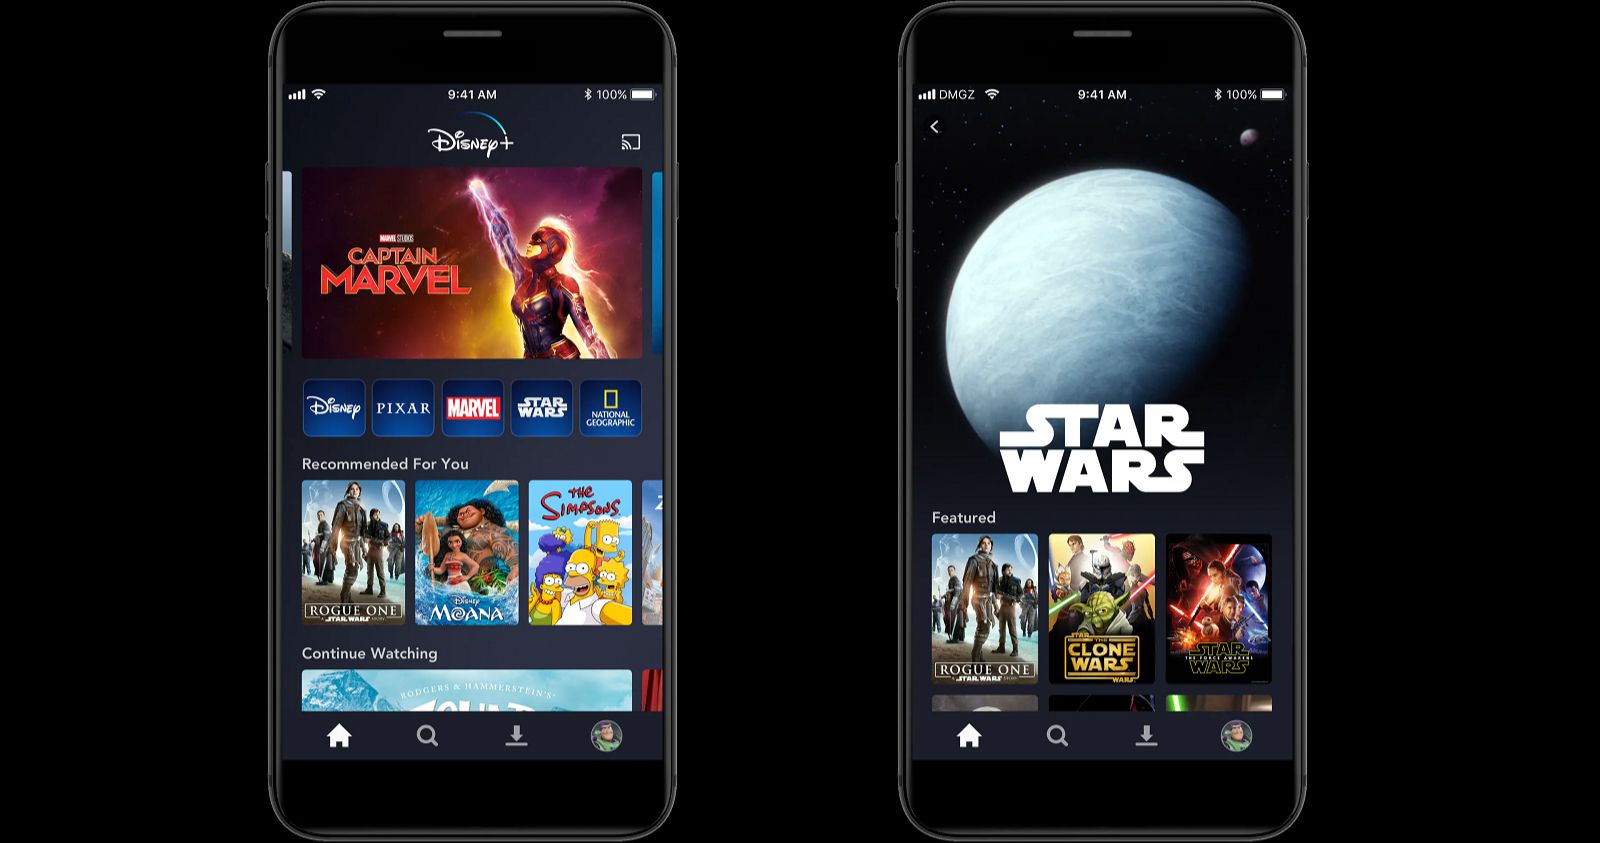 Verizon Is Giving One Free Year of Disney+ to All Unlimited Customers